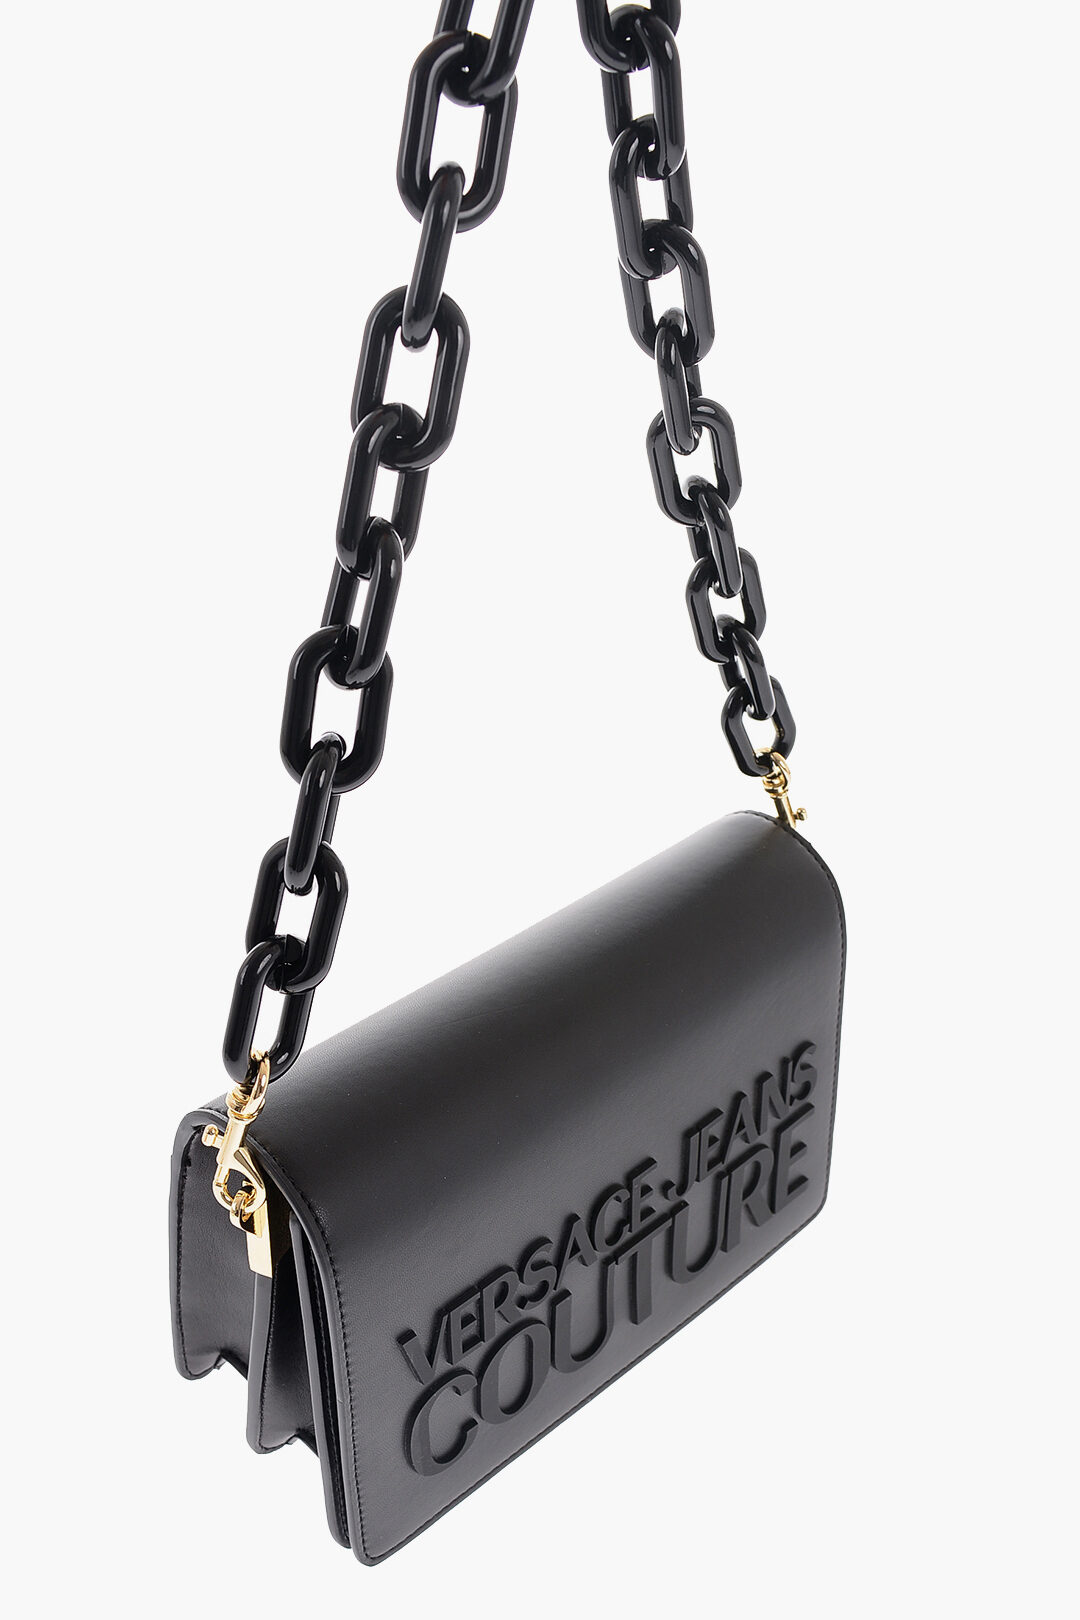 Versace Jeans Women's Chain Couture Tote Bag - Metallic - Totes